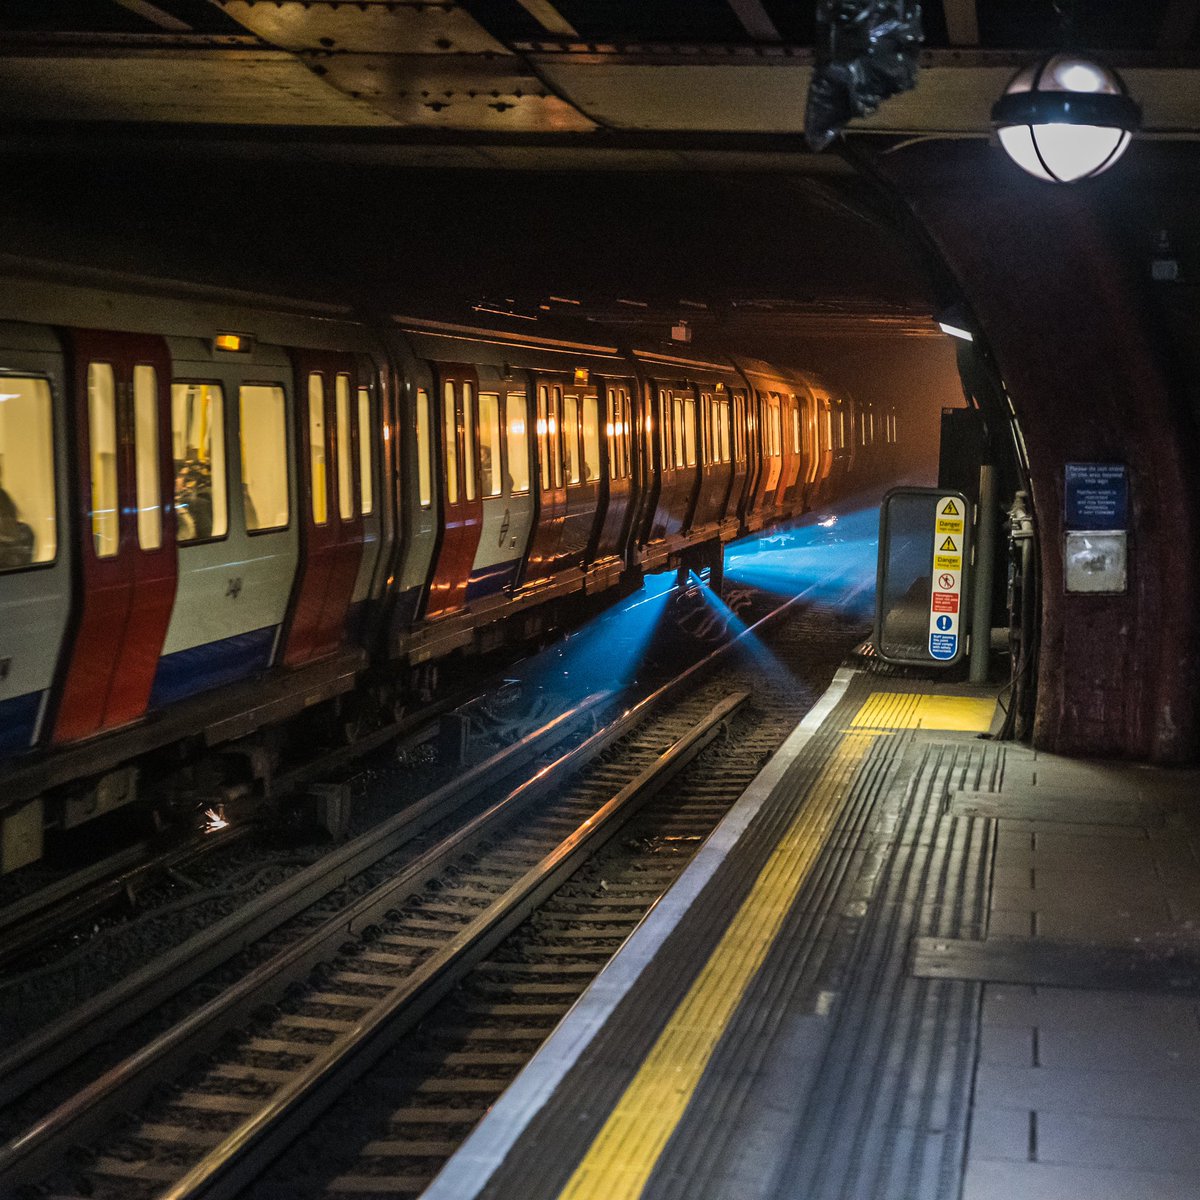 [THREAD]  #PictureOfTheDay 28th February 2020: Tube Lights  #photooftheday